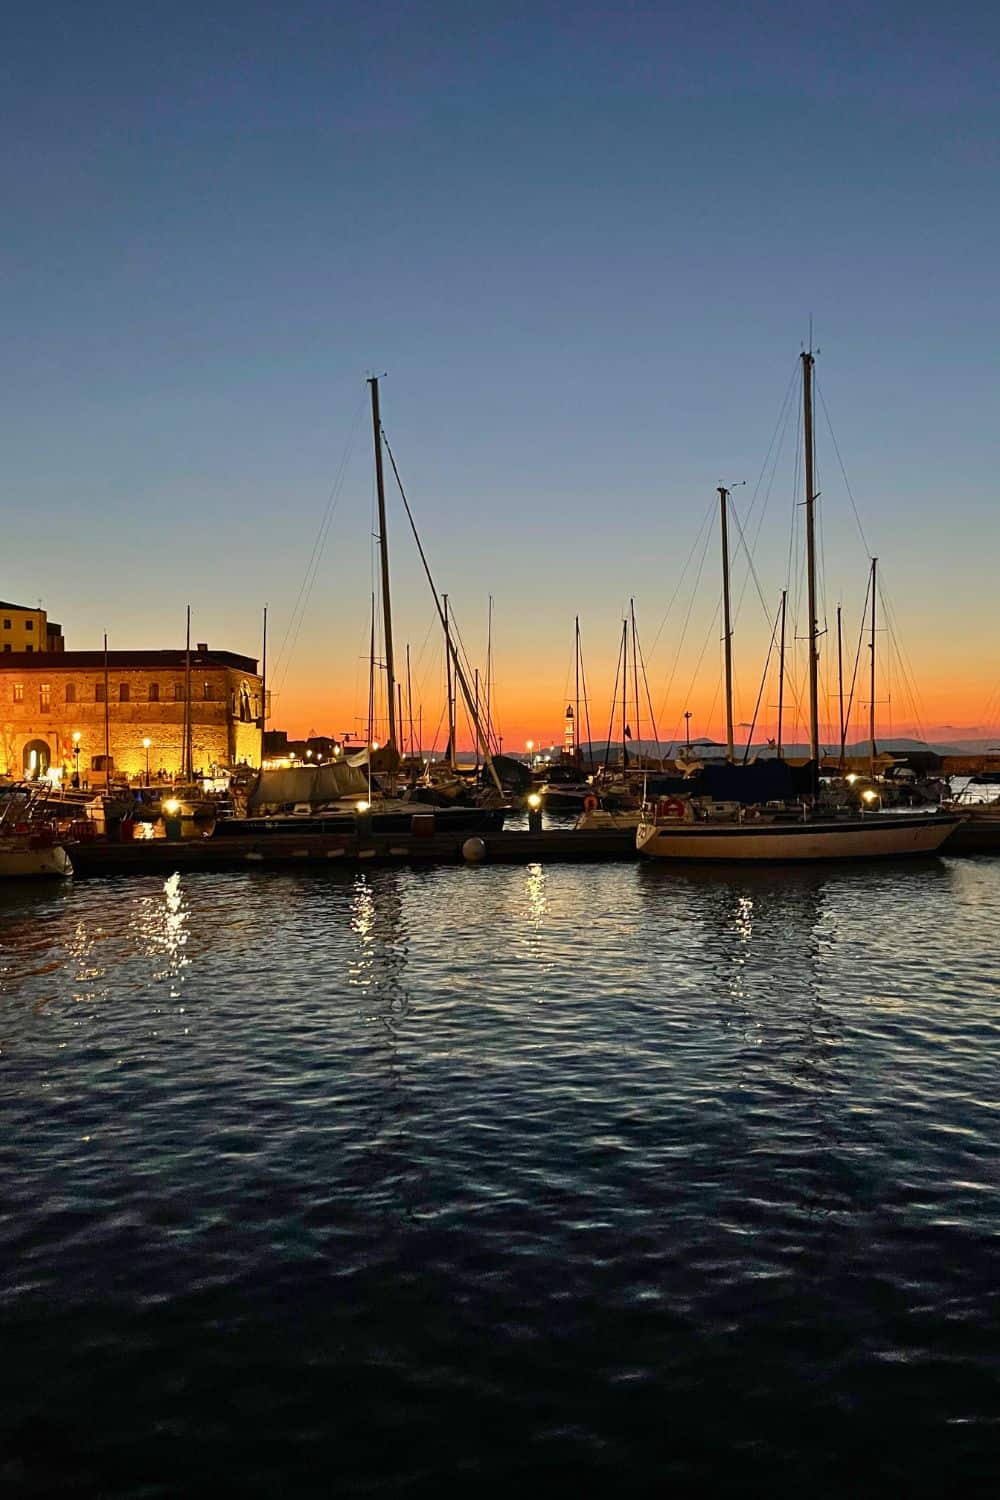 Chania harbor at sunset with boats in the water